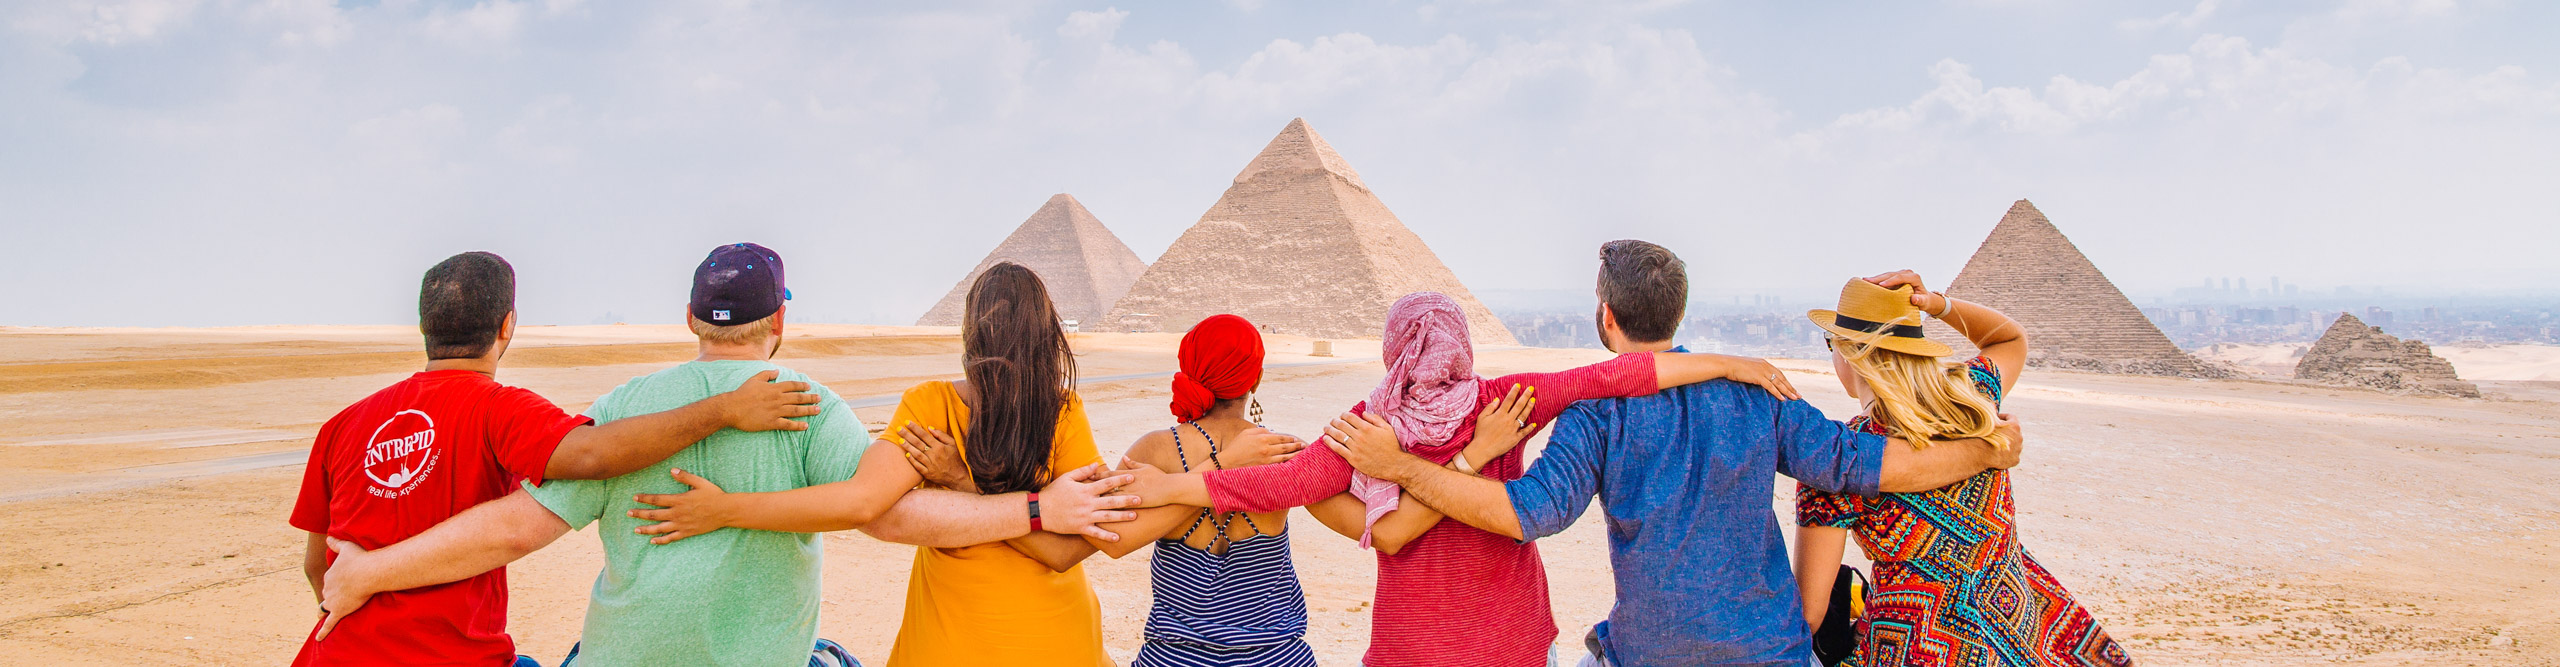 Group in colourful clothing hugging whilst looking at the Pyramids in Egypt on a clear day 